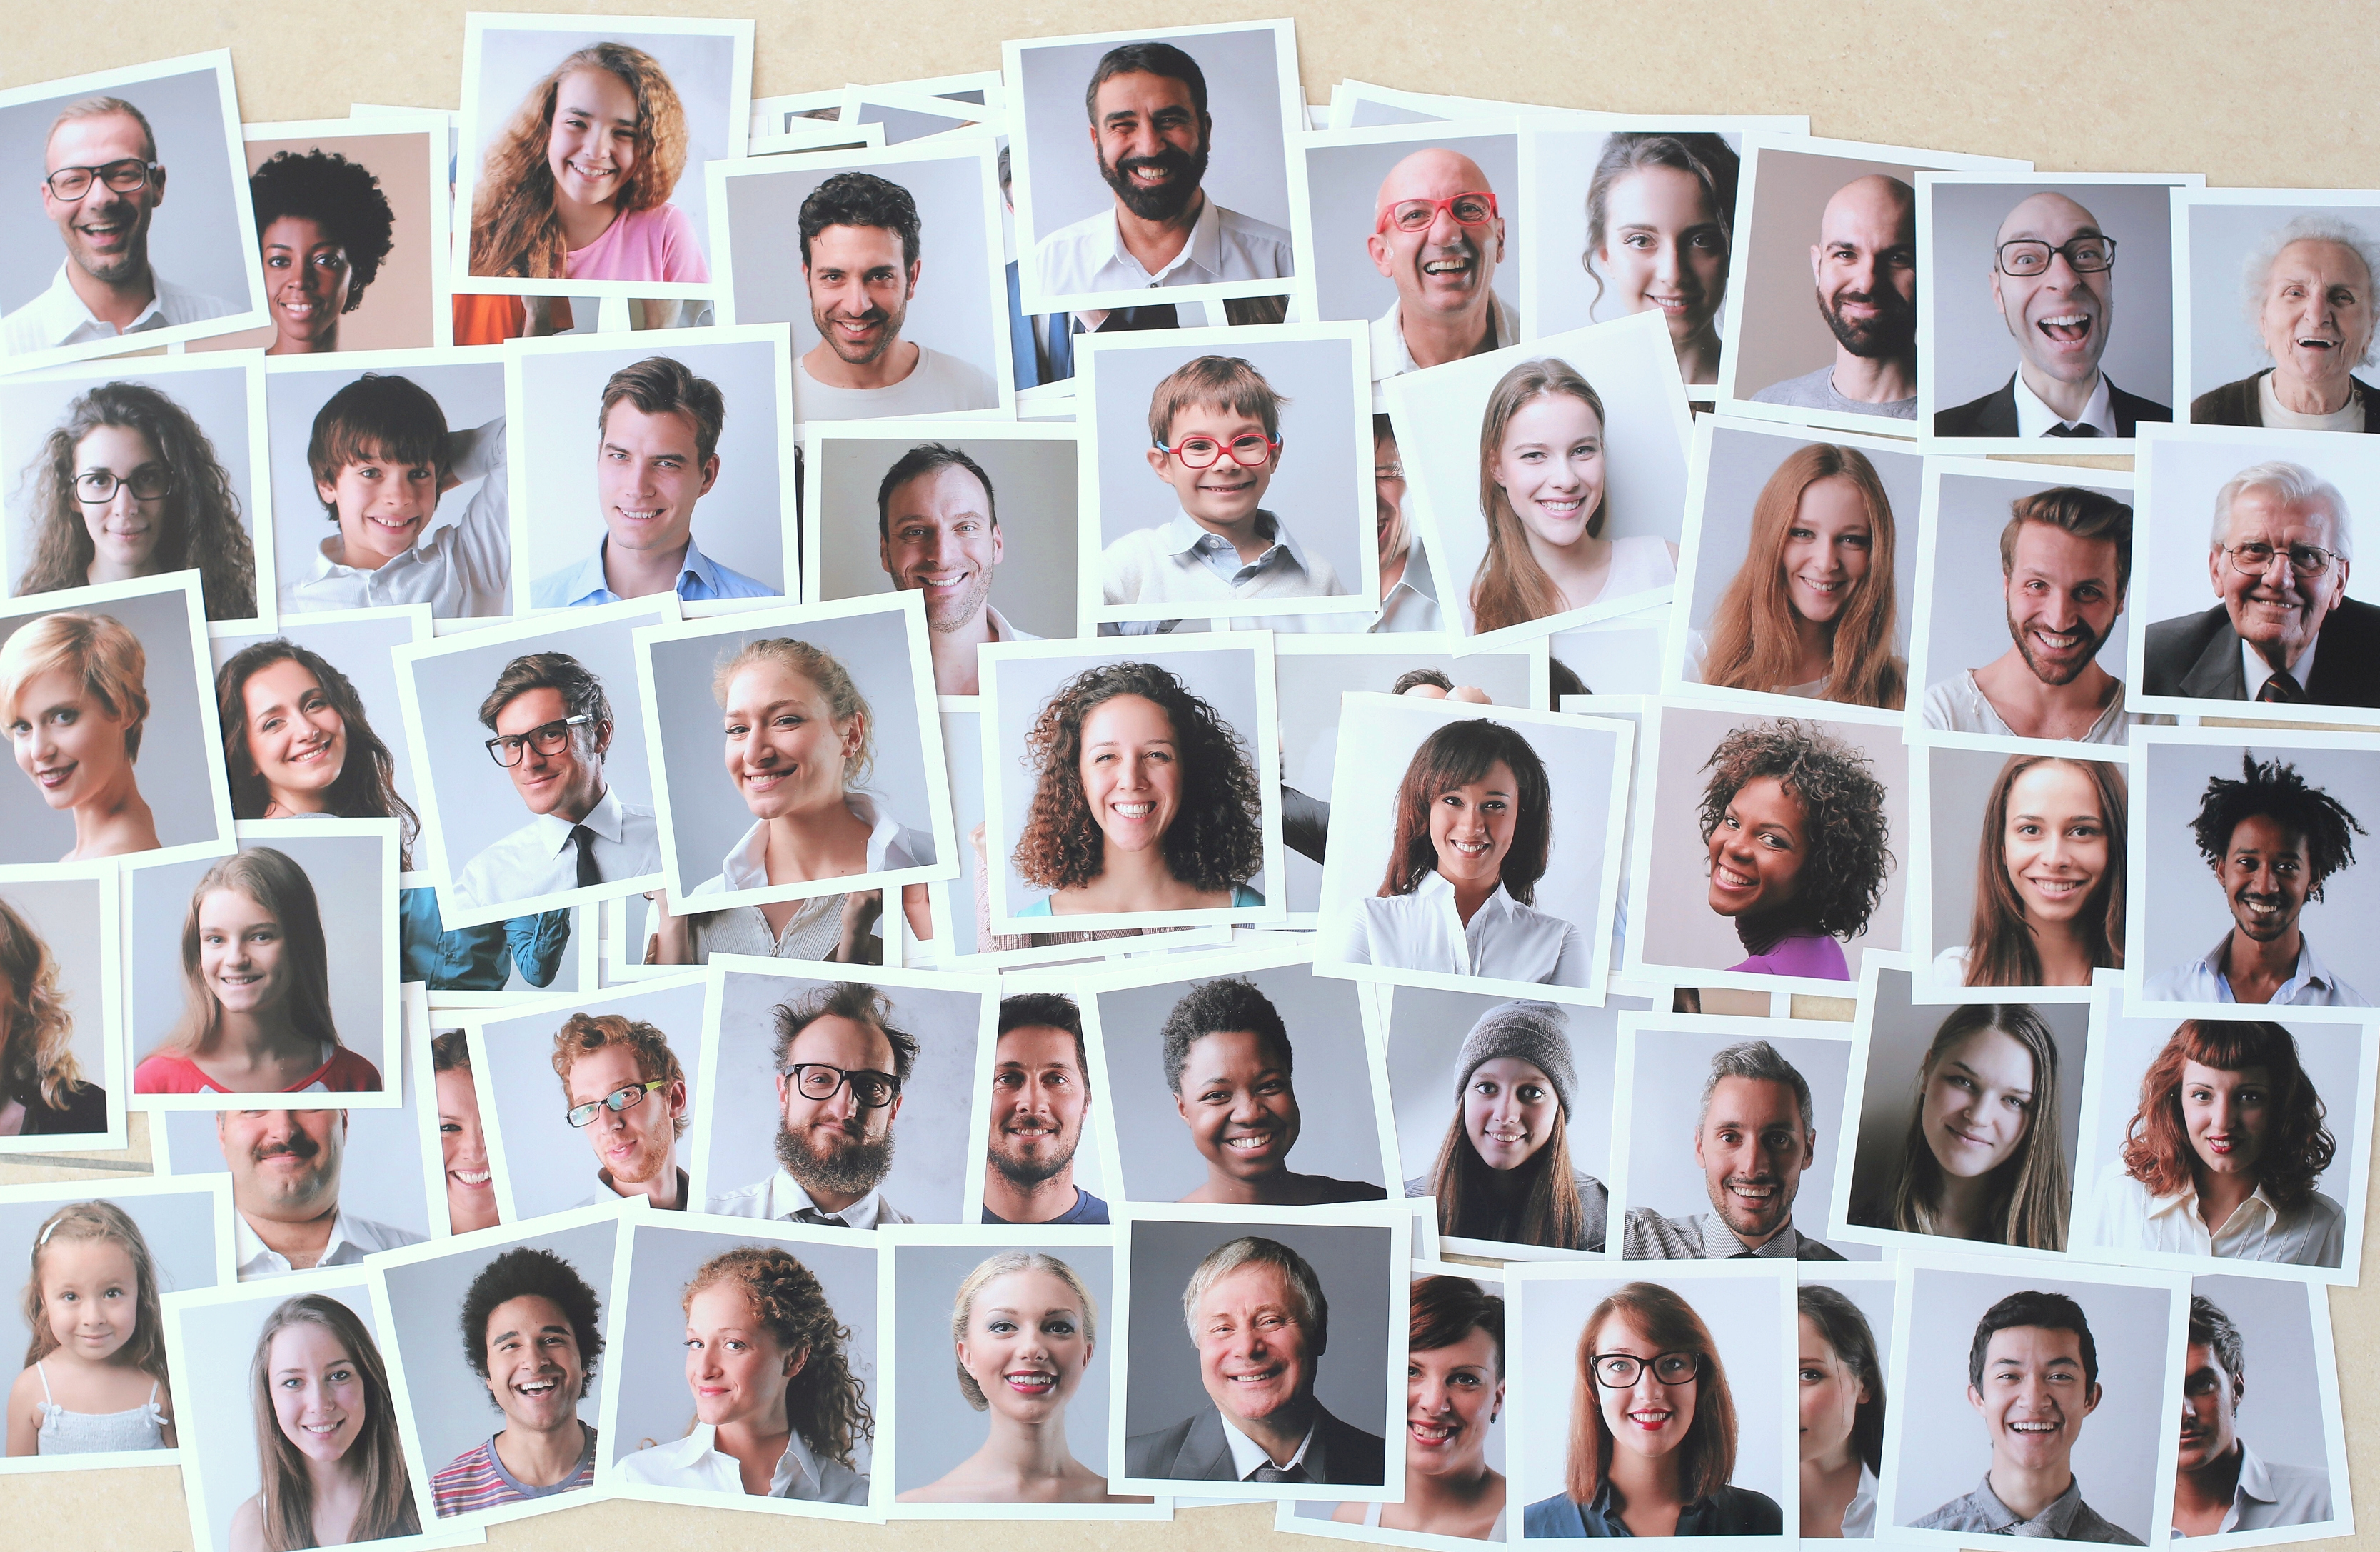 Snapshots of people of different races, genders and ages are scattered across a surface.